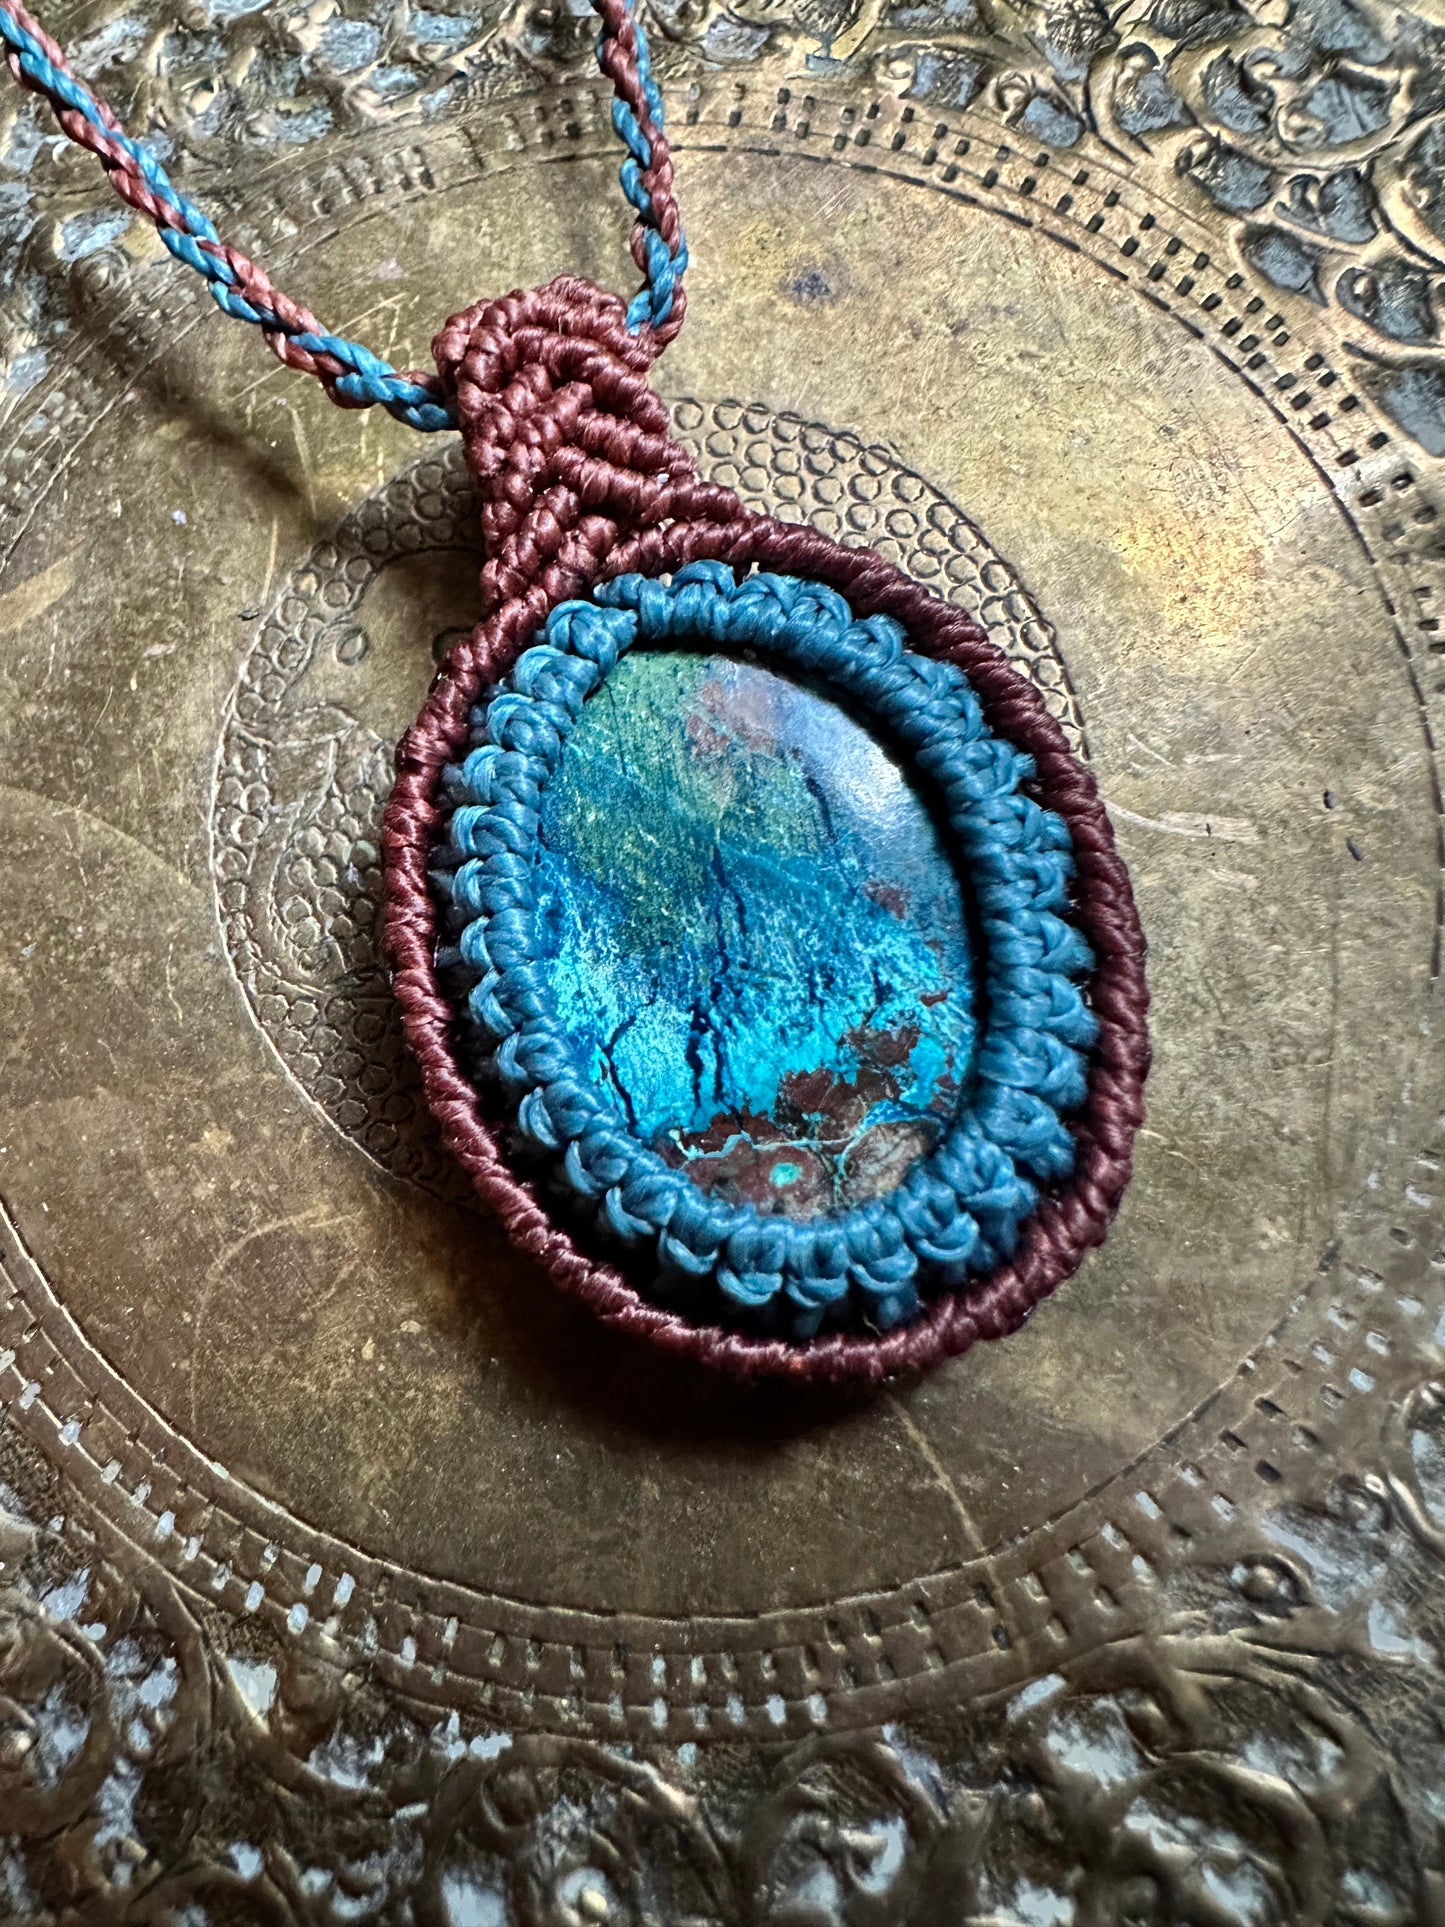 Chrysocolla Necklace